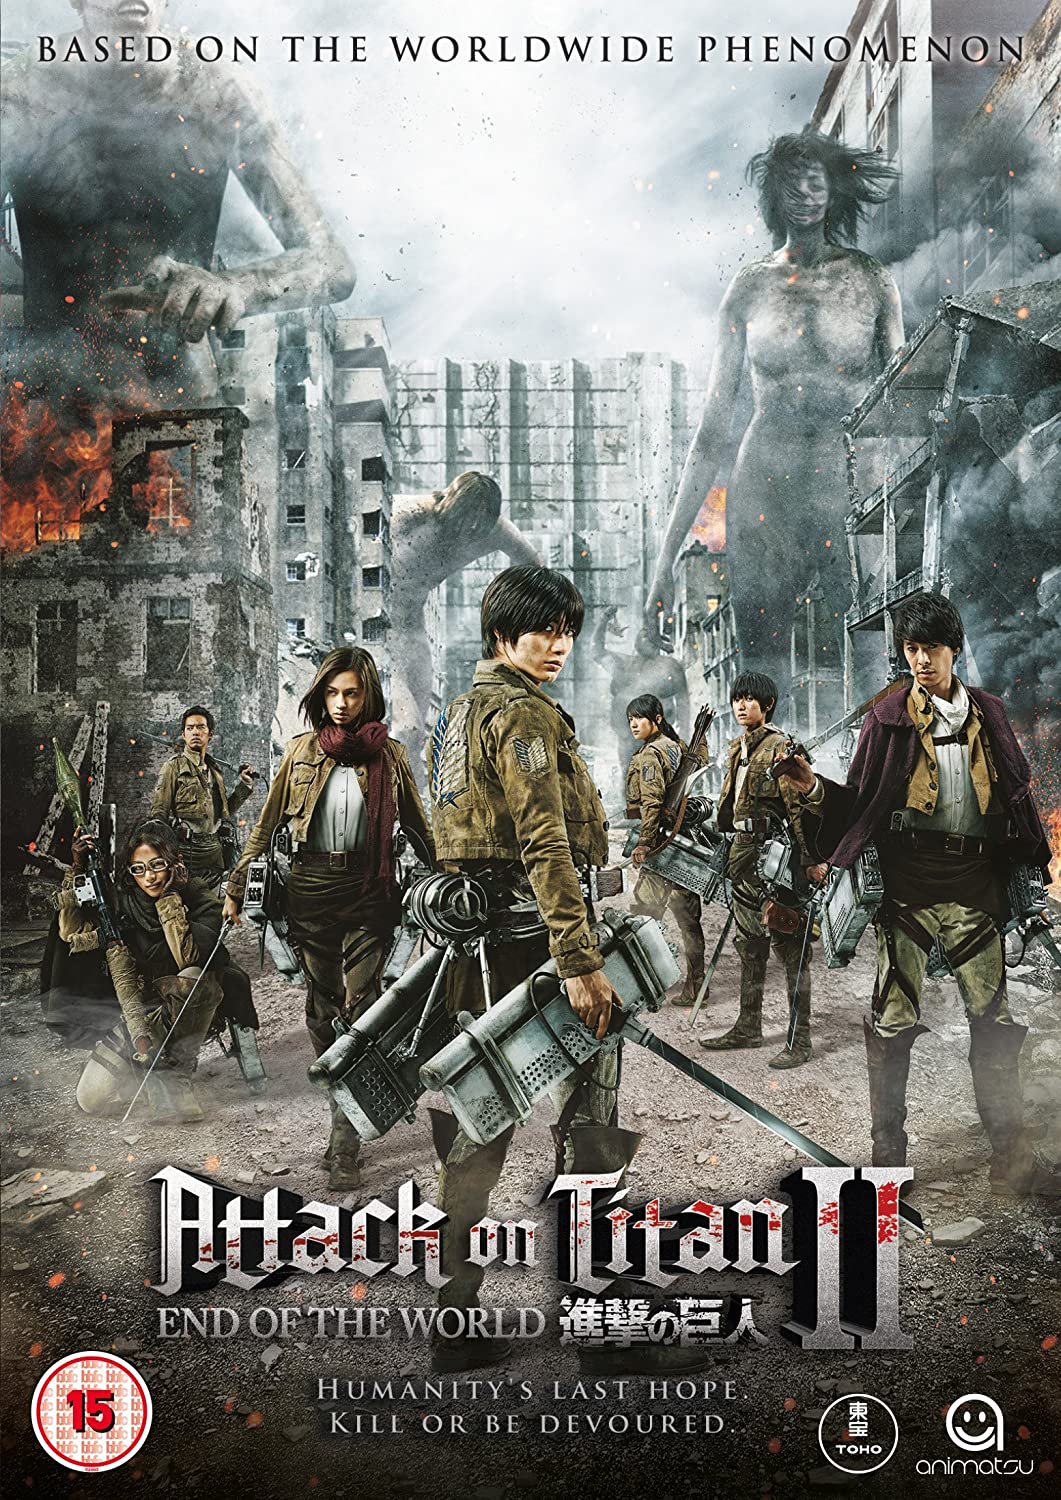 Anime Bluray - Attack On Titan The Movie Part 2: End of the World